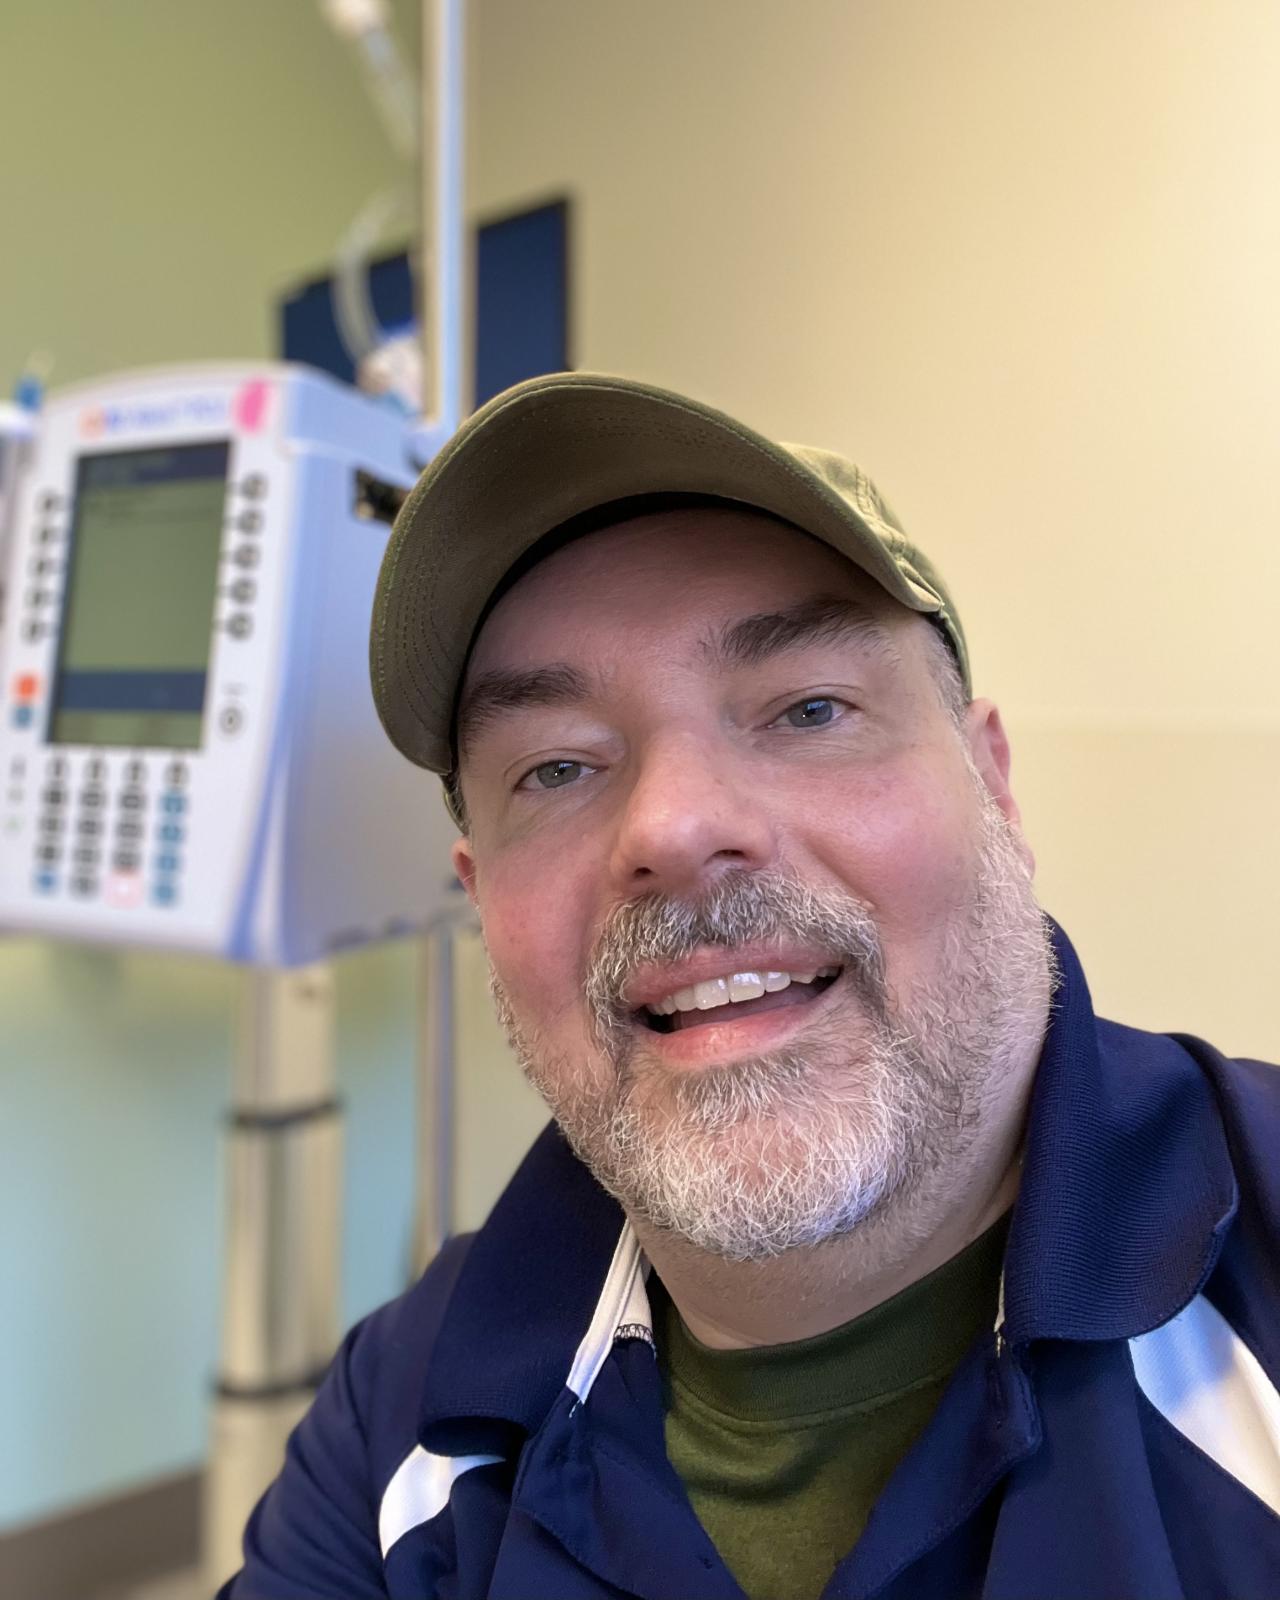 Matt Calkins getting an Ocrevus Infusion at the University of Washington Outpatient Medical Center